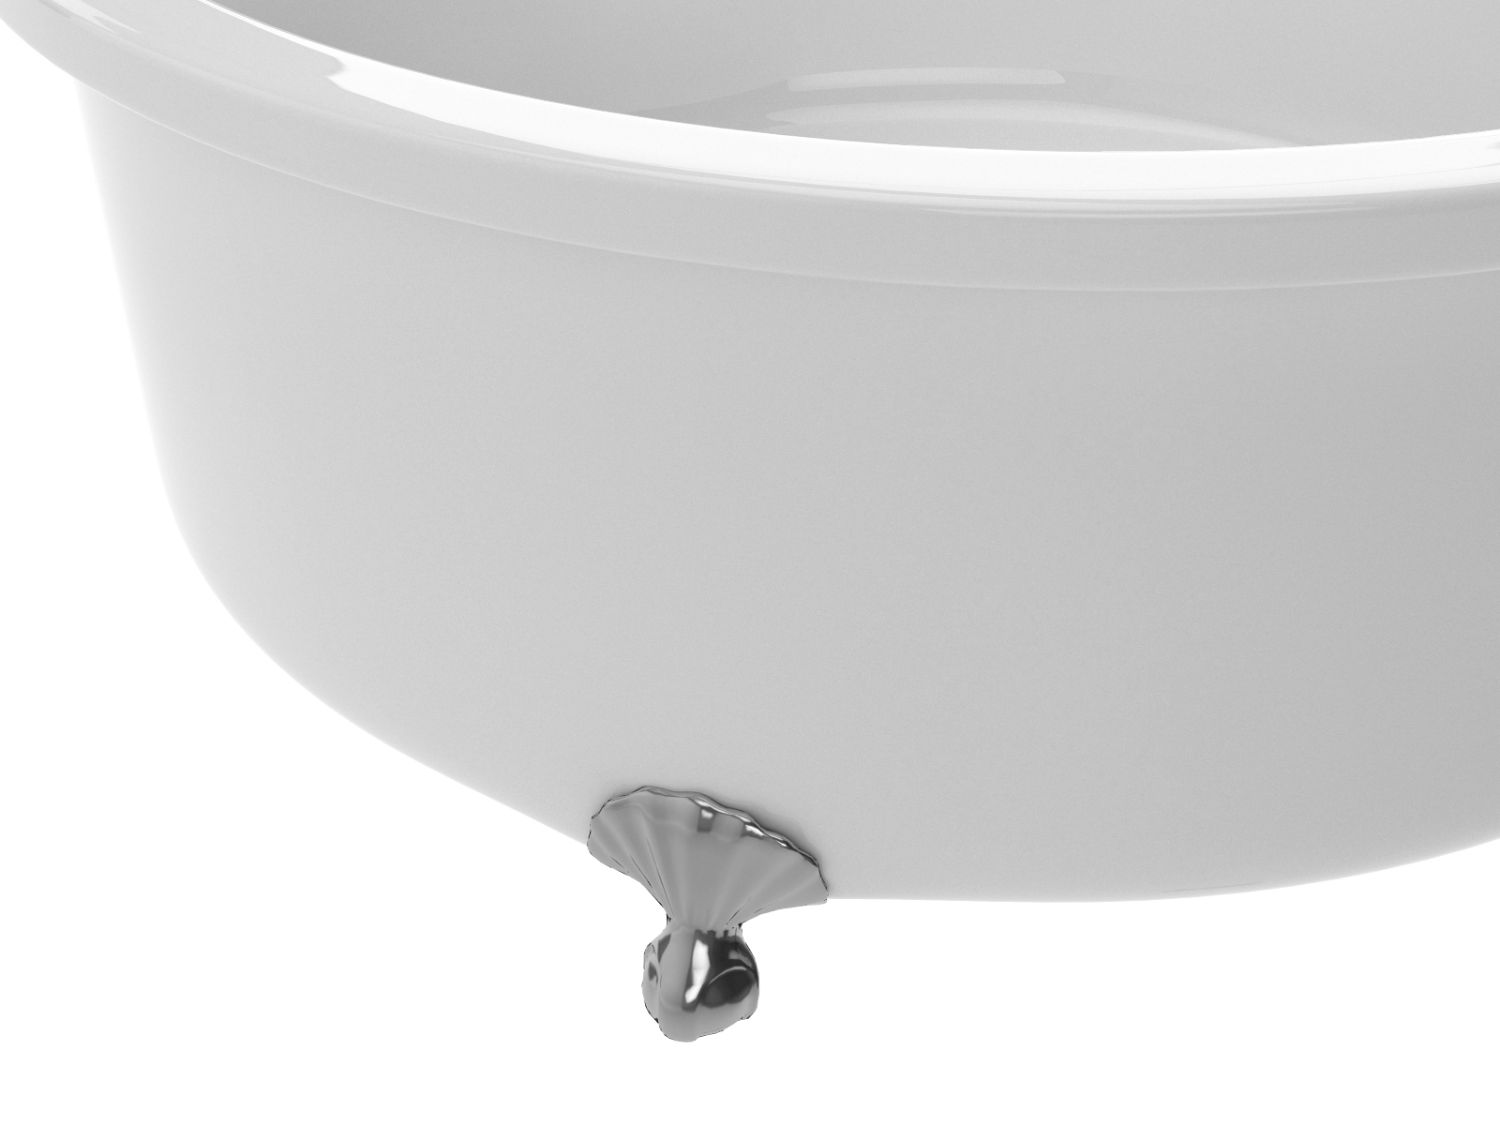 Cantor Series 4.9 ft. Acrylic Clawfoot Non-Whirlpool Bathtub in White